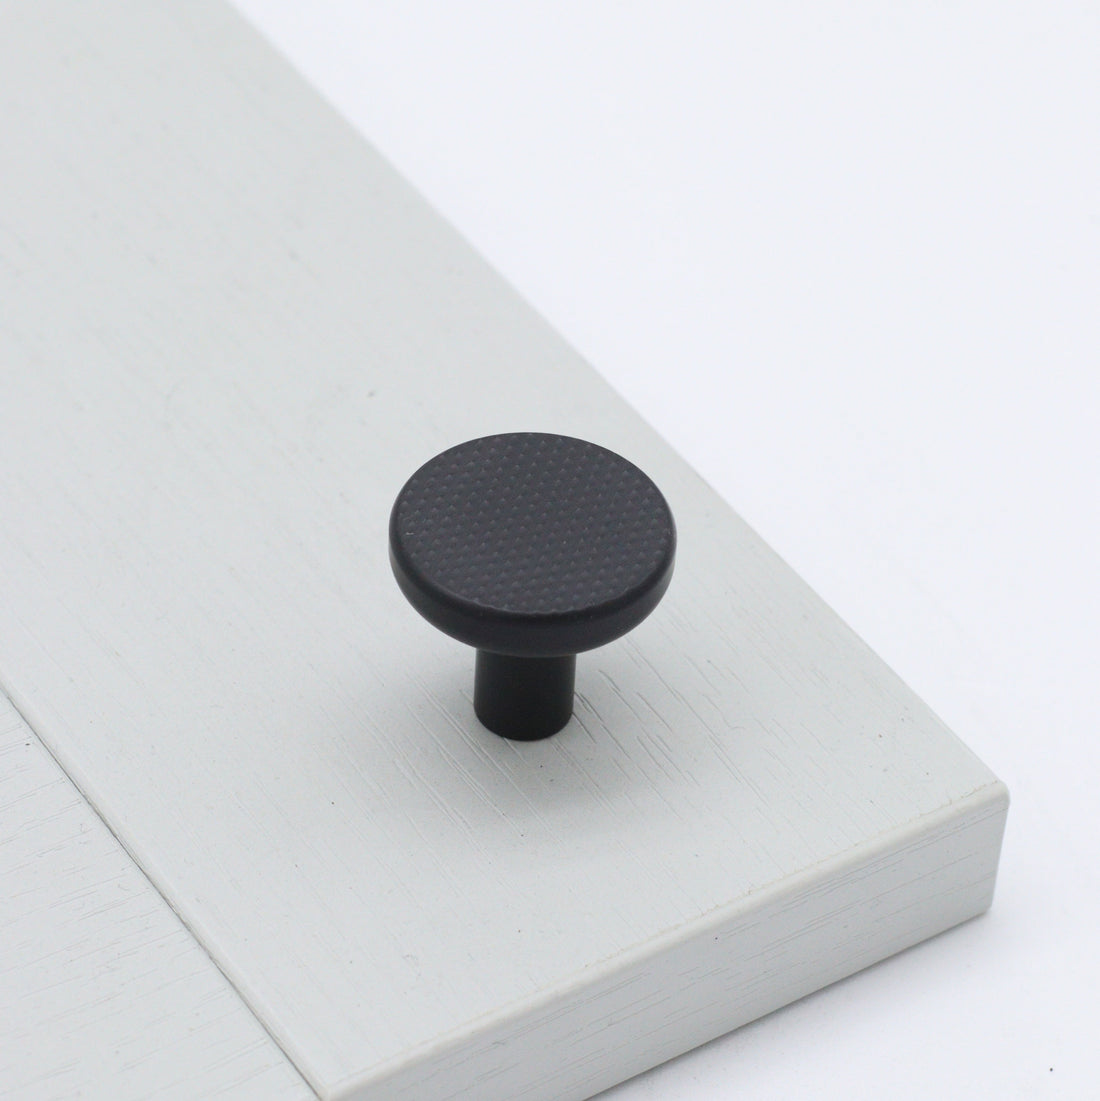 Bonnington button rounded knob with knurl detail in ceramic black on pale grey shaker cabinetry door 